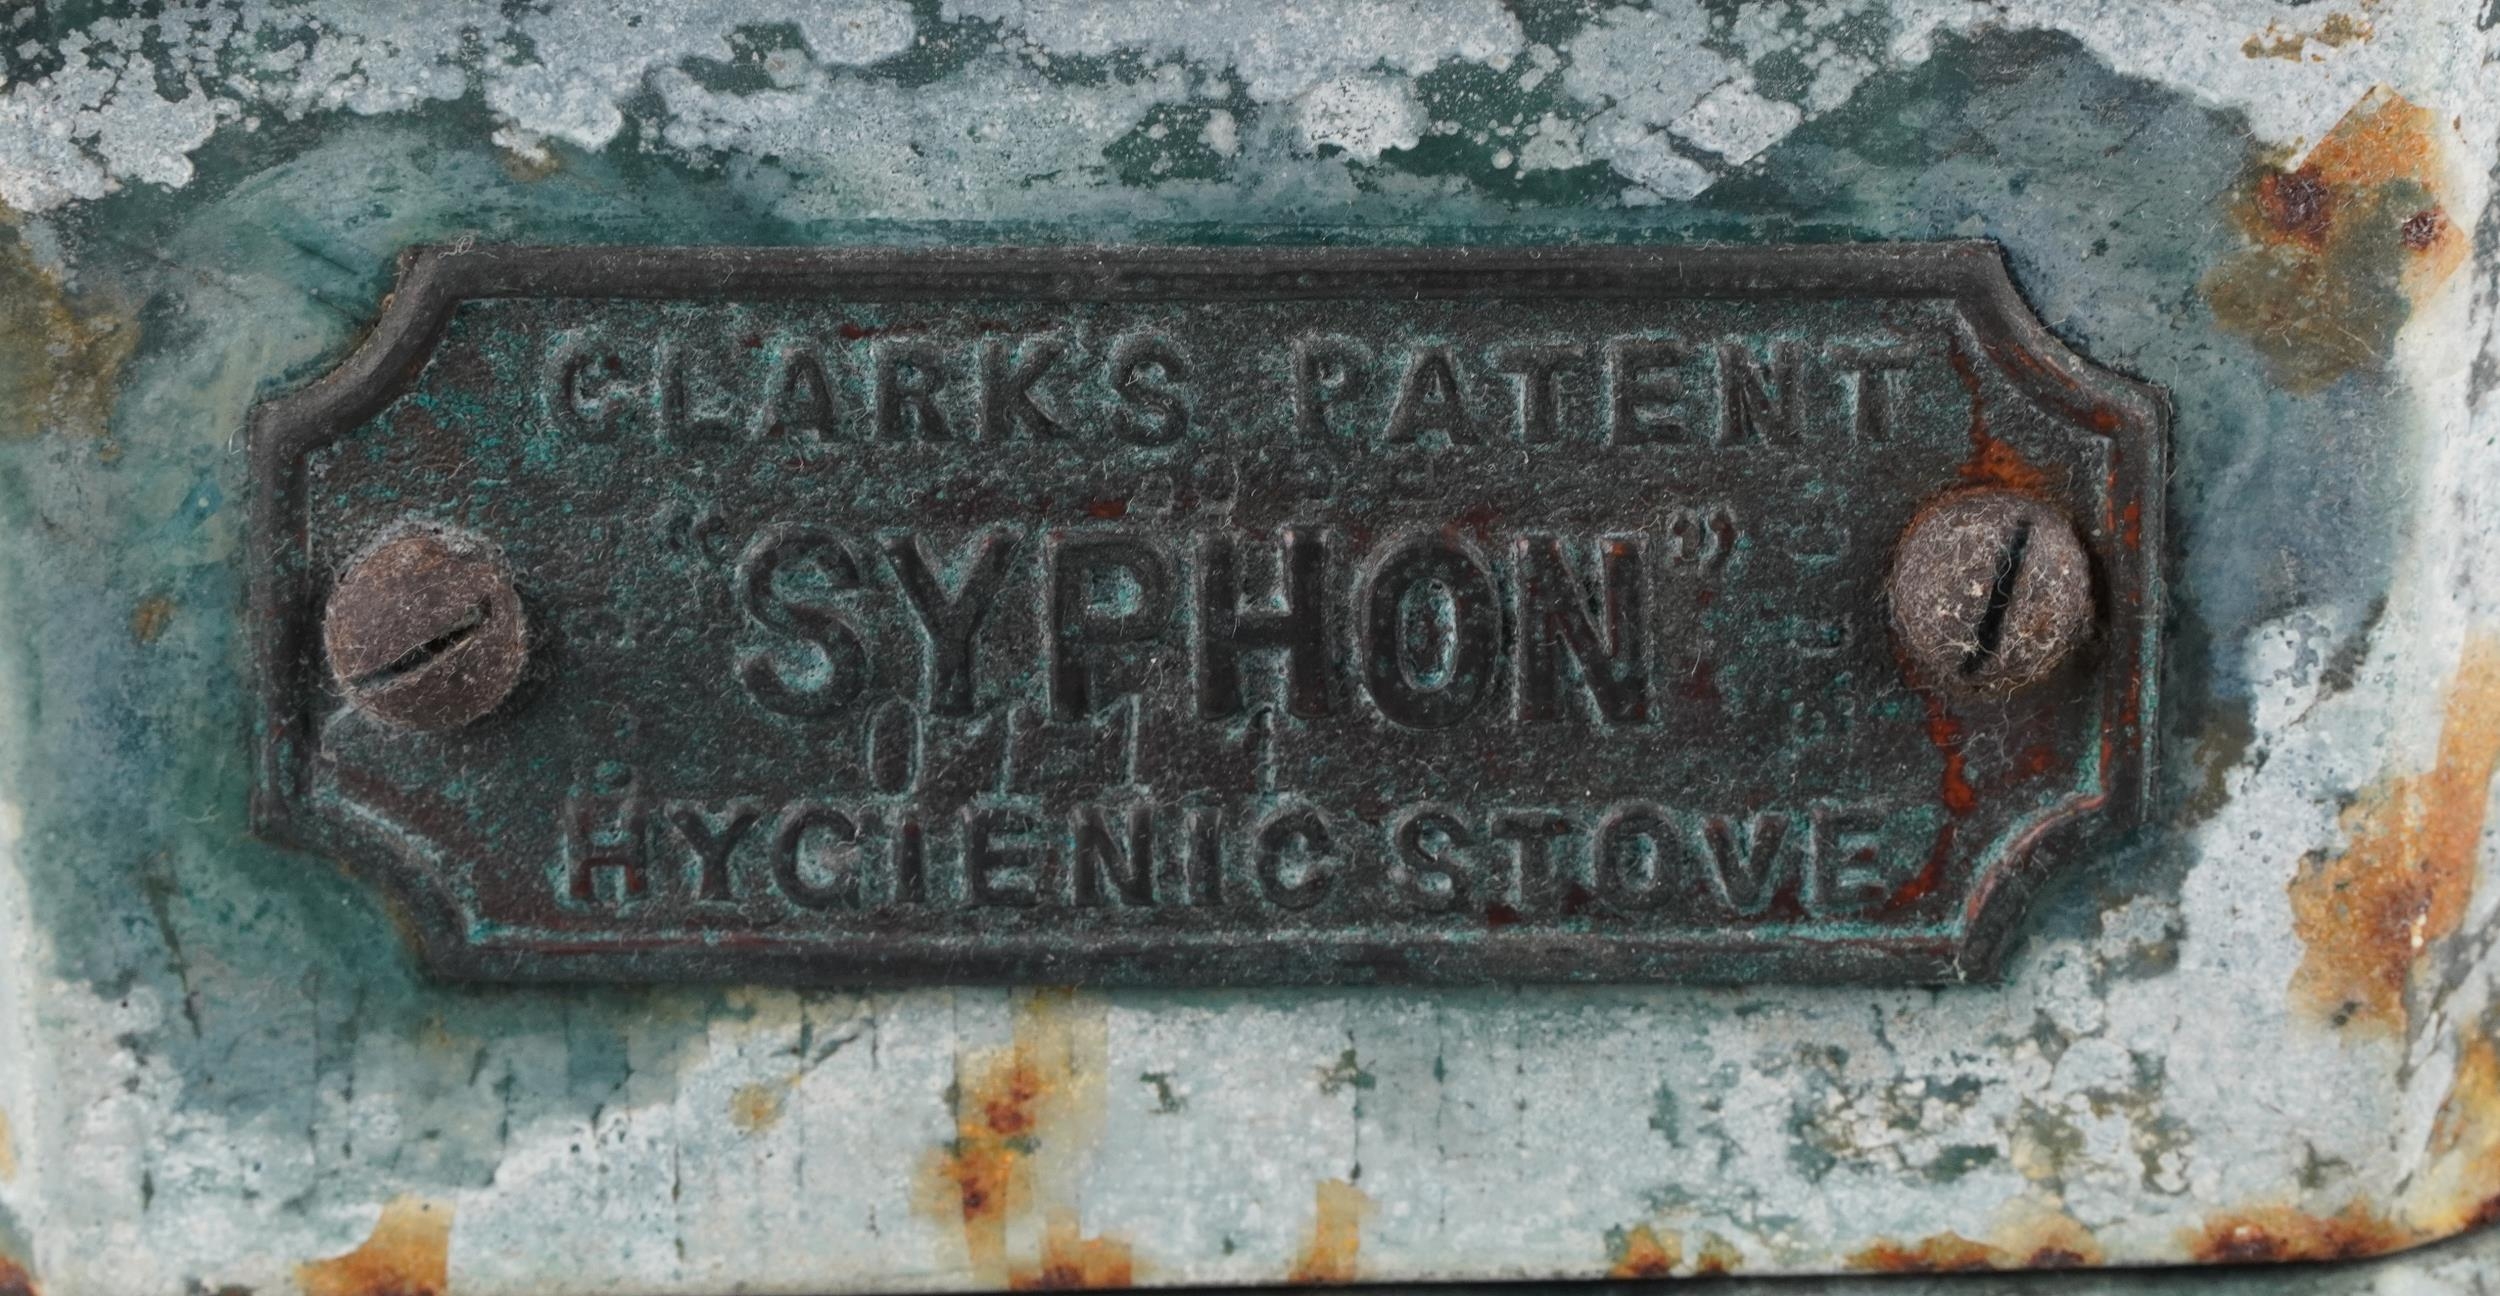 Victorian cast iron green enamelled Clark's patent Syphon Hygienic stove, 119 H x 64 W x 36 D - Image 4 of 4